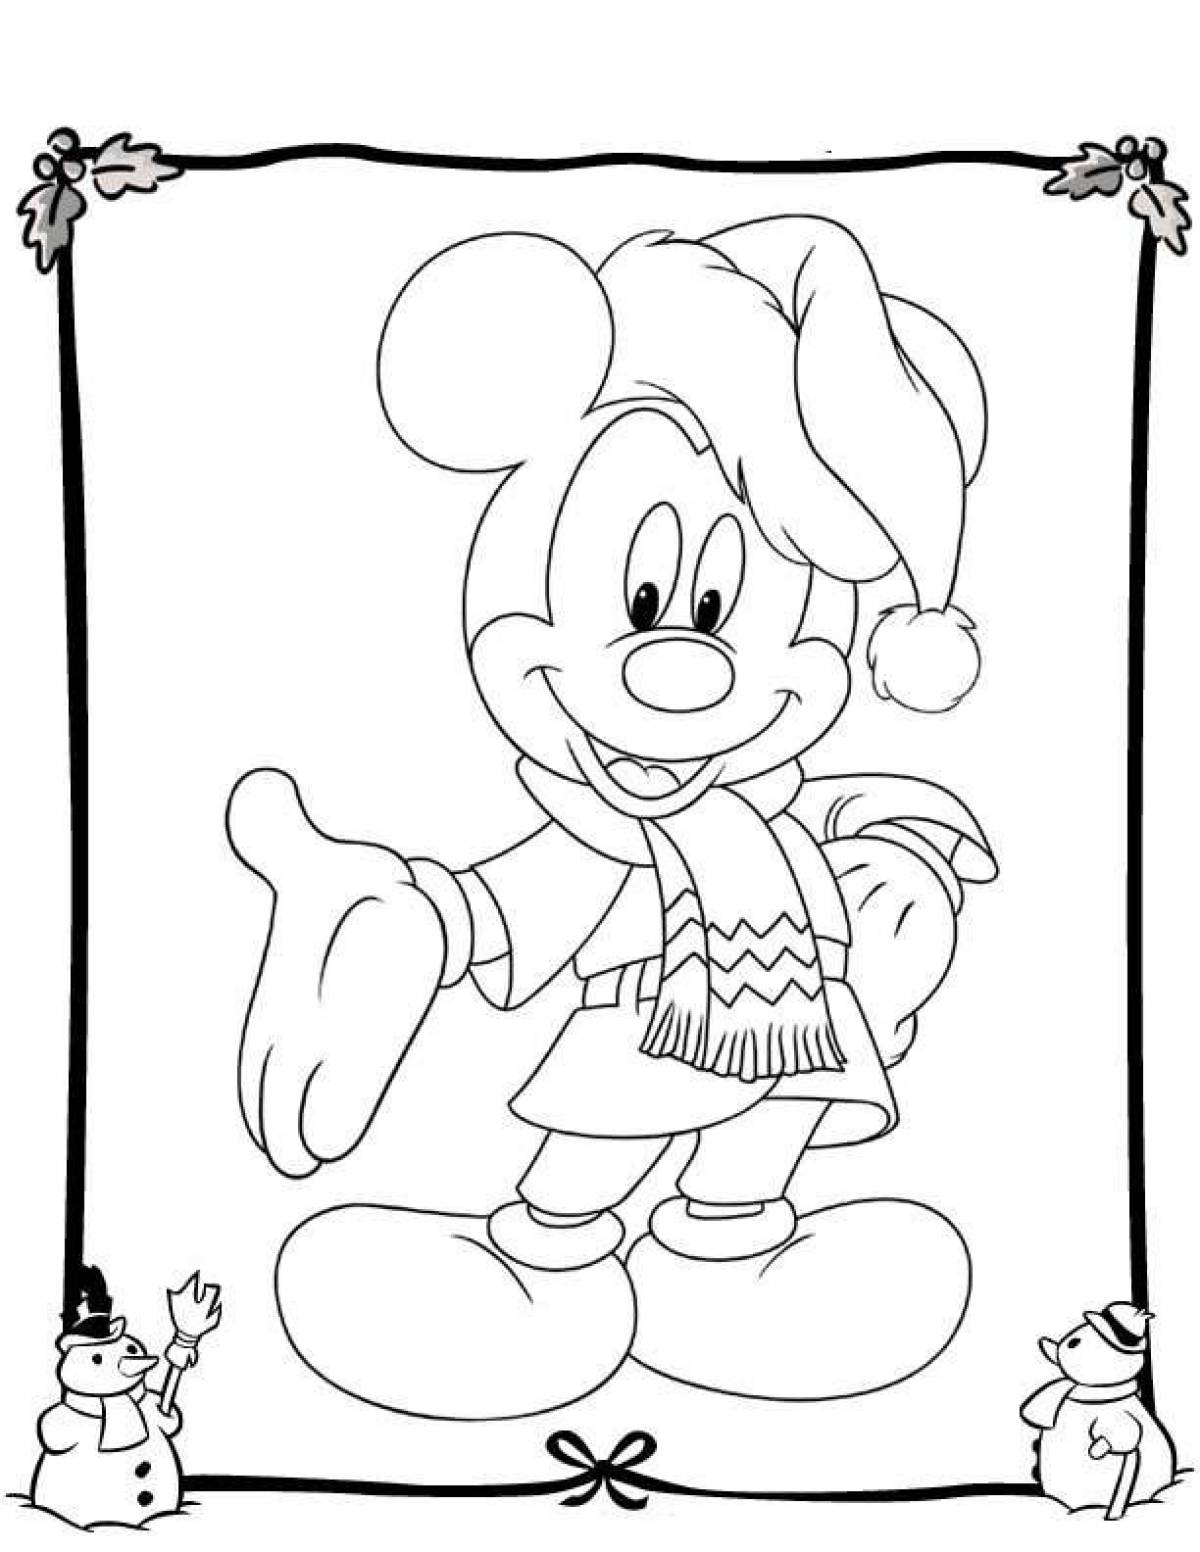 Disney new year coloring pages